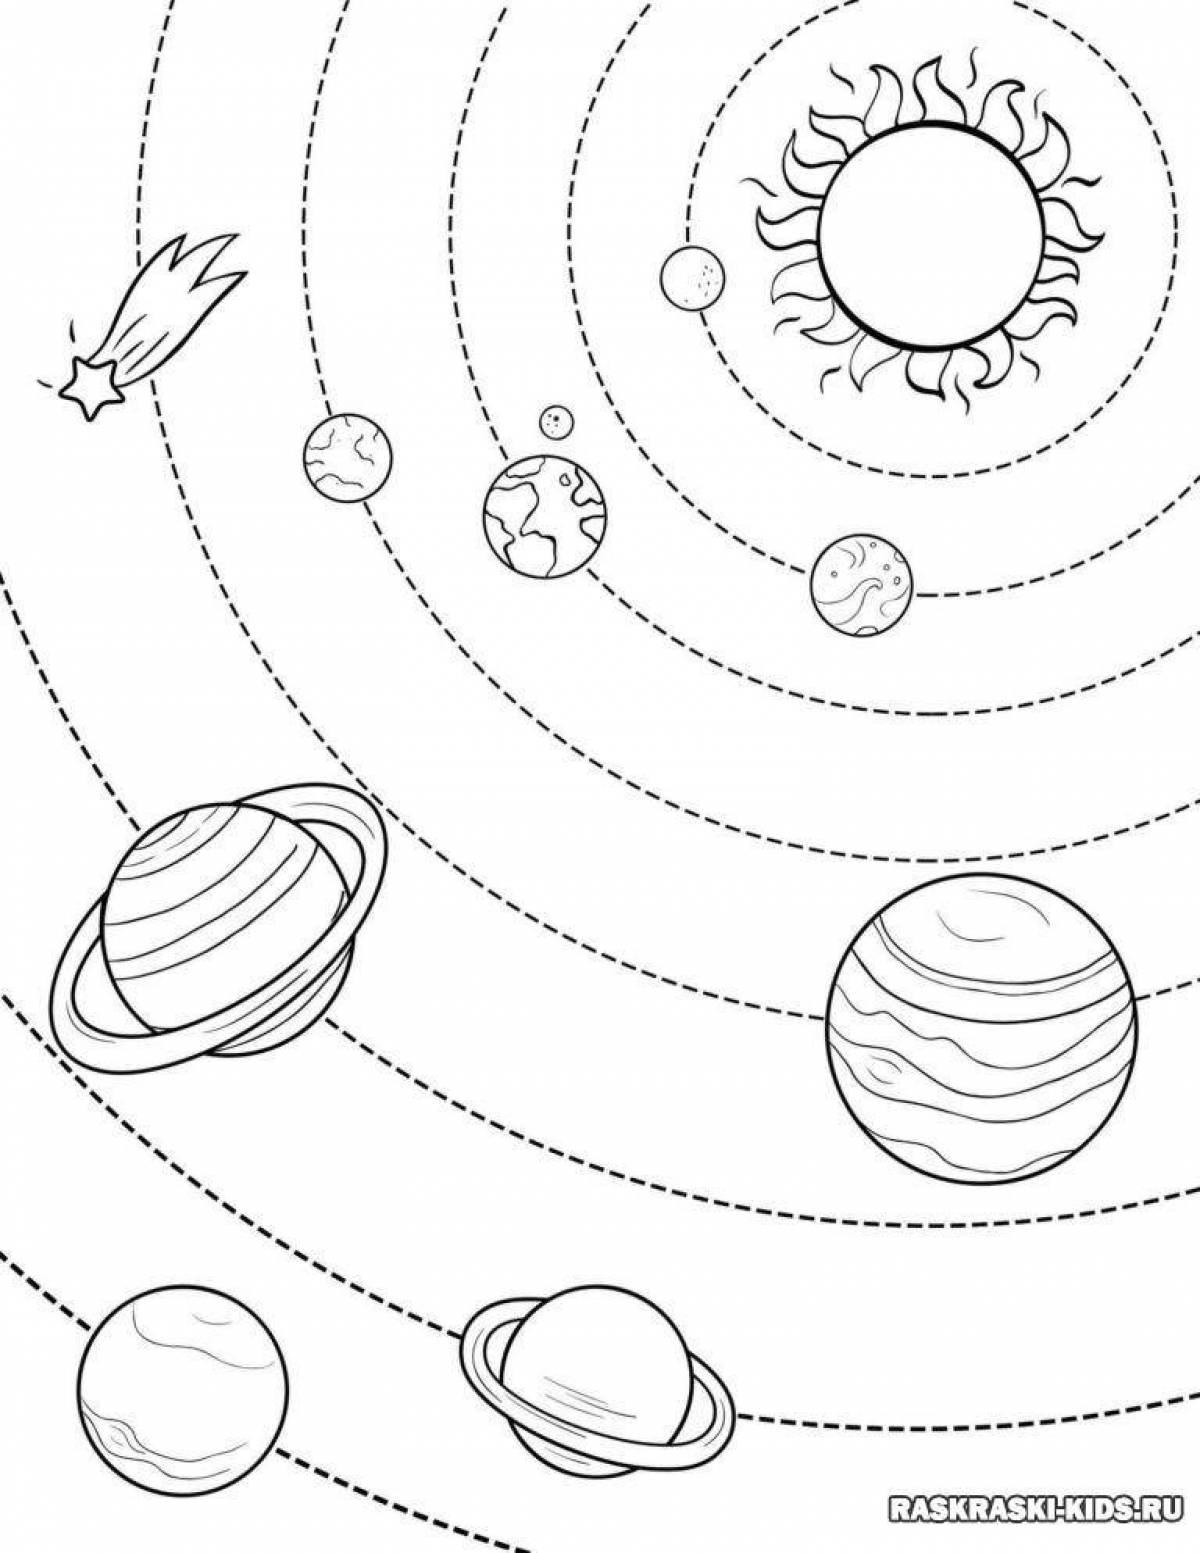 Colourful solar system coloring pages for kids